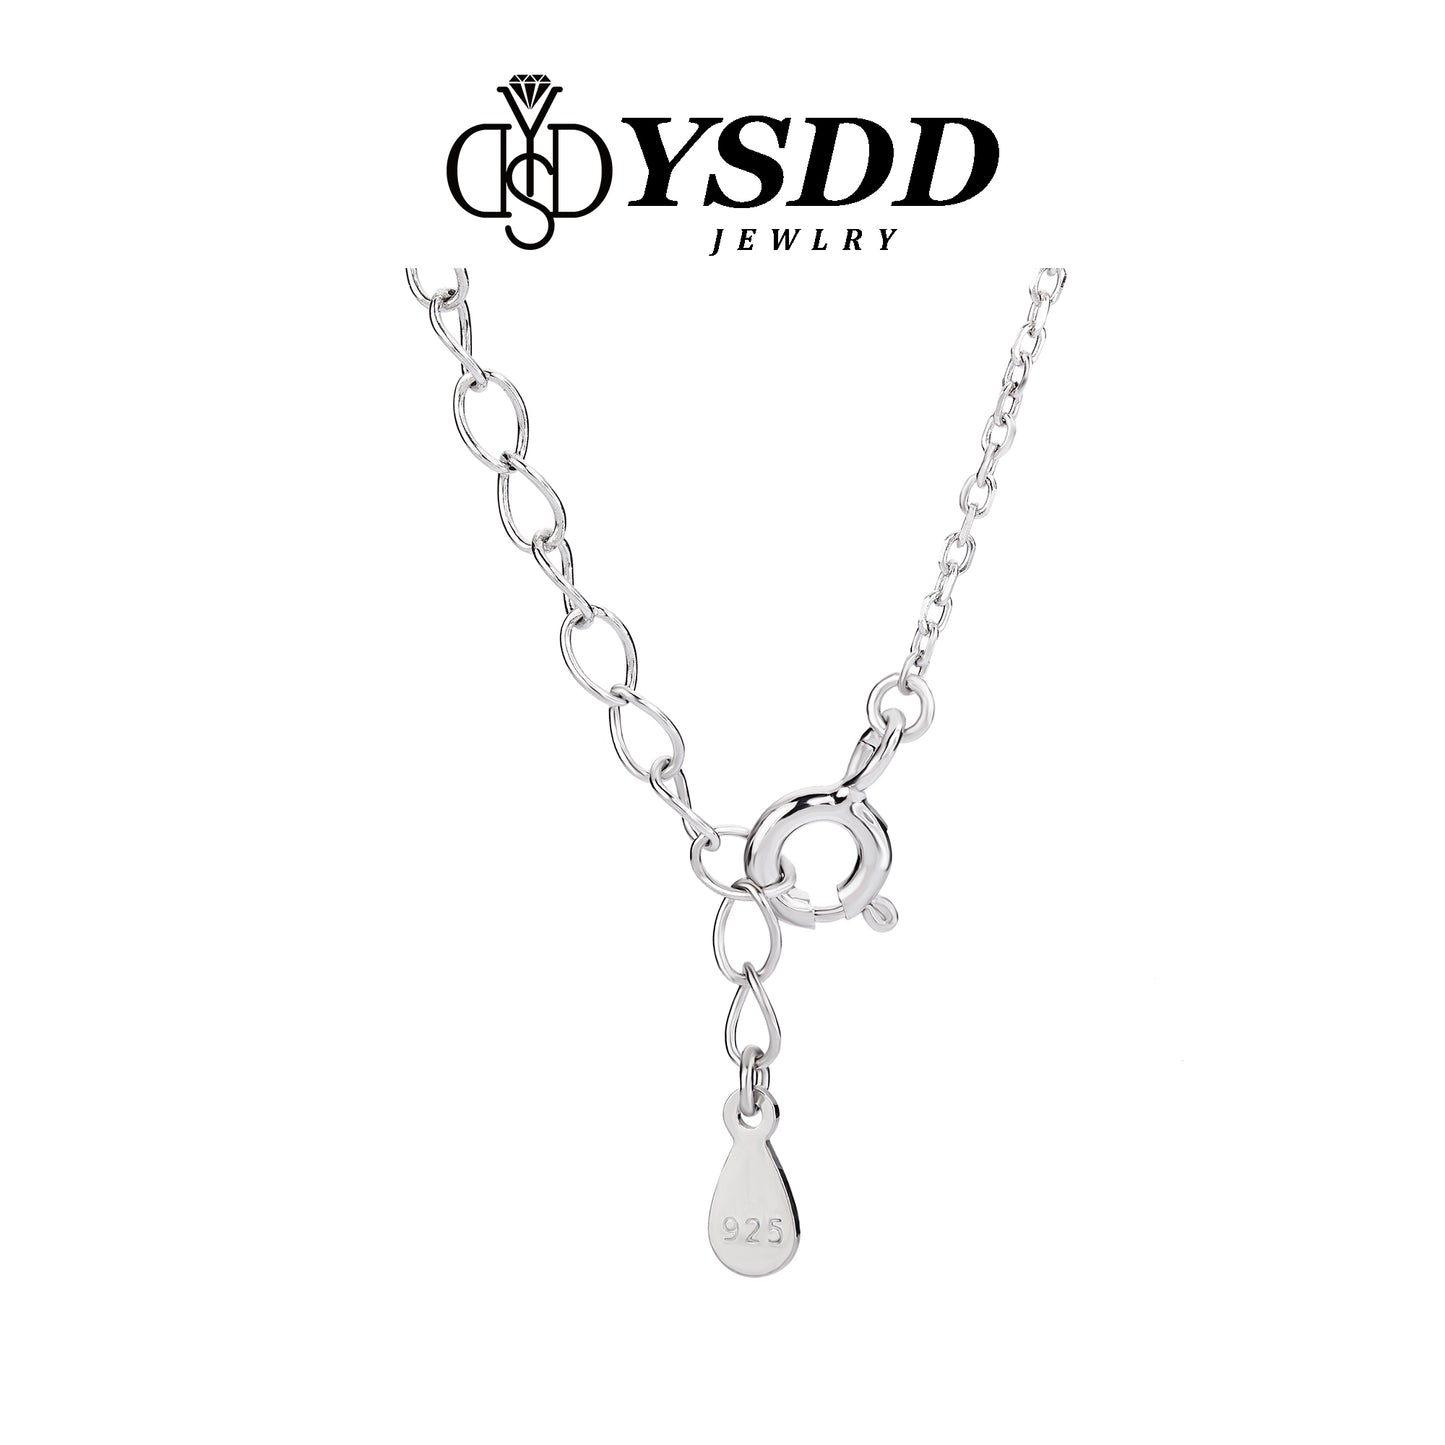 【#209 Business Casual】Regal Moissanite Pendant Necklace in s925